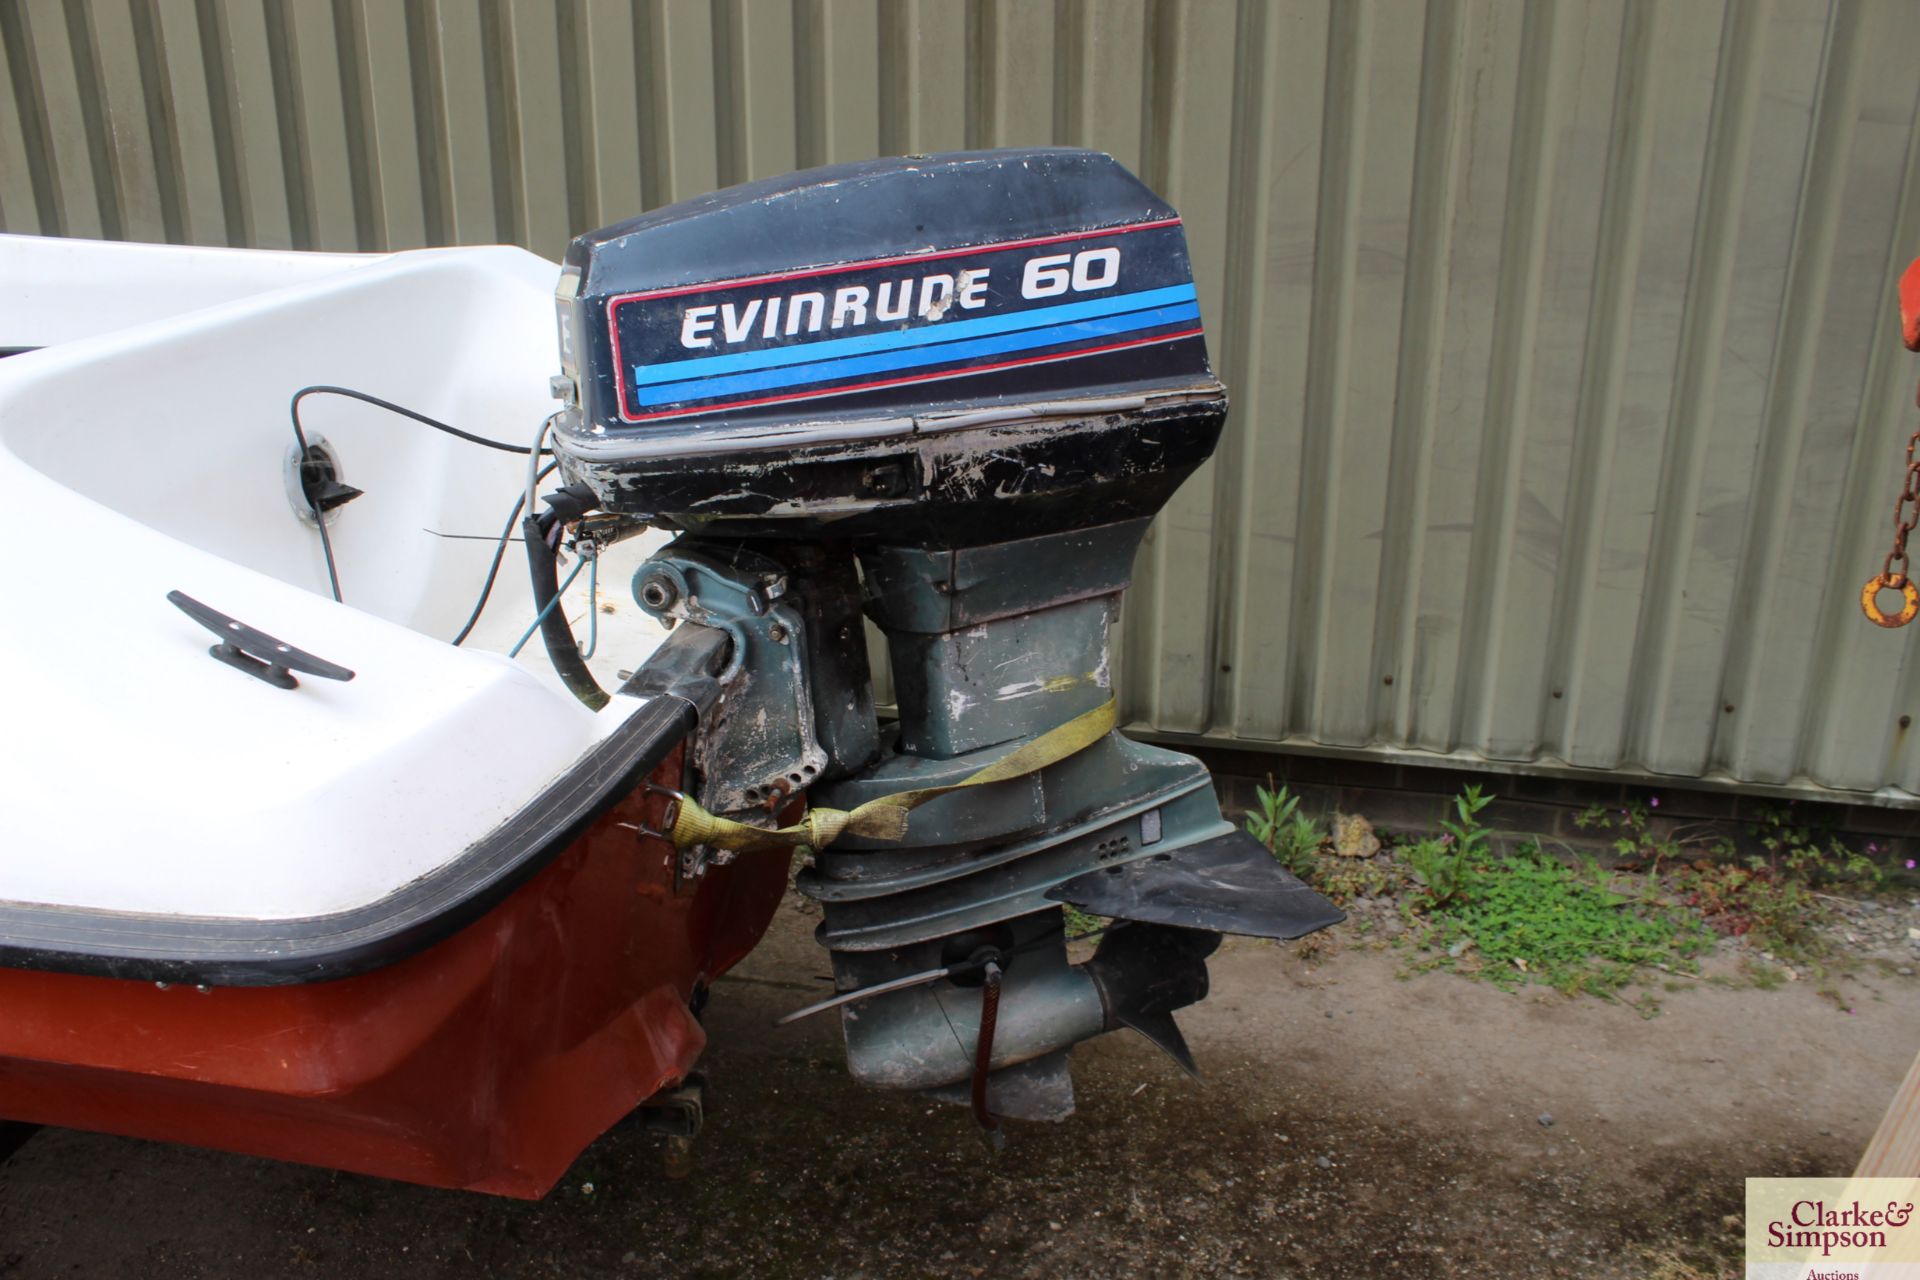 13ft speedboat. With Evinrude 60HP outboard (runs and pumps water), trailer, water skis, knee board, - Image 5 of 17